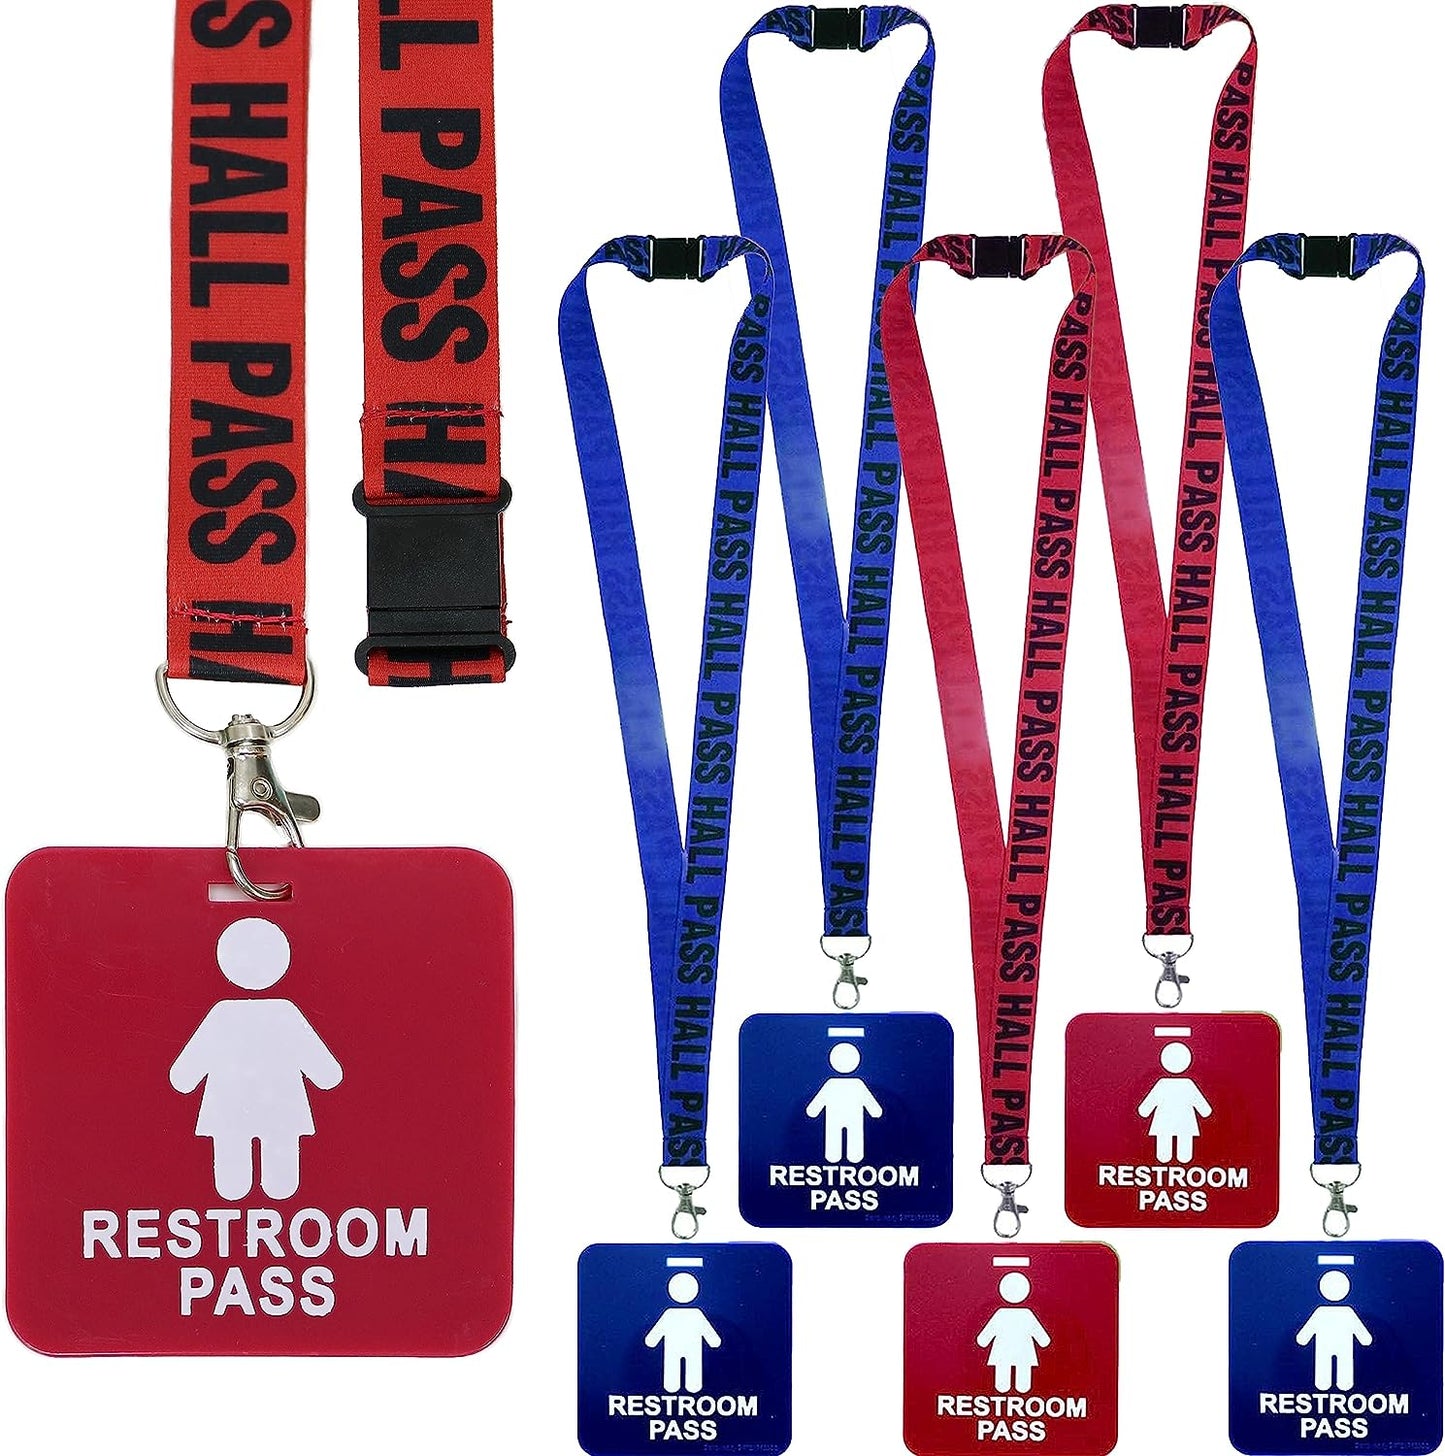 GIFTEXPRESS 6pcs Hall Pass Lanyards and School Passes Boys and Girl Bathroom Passes